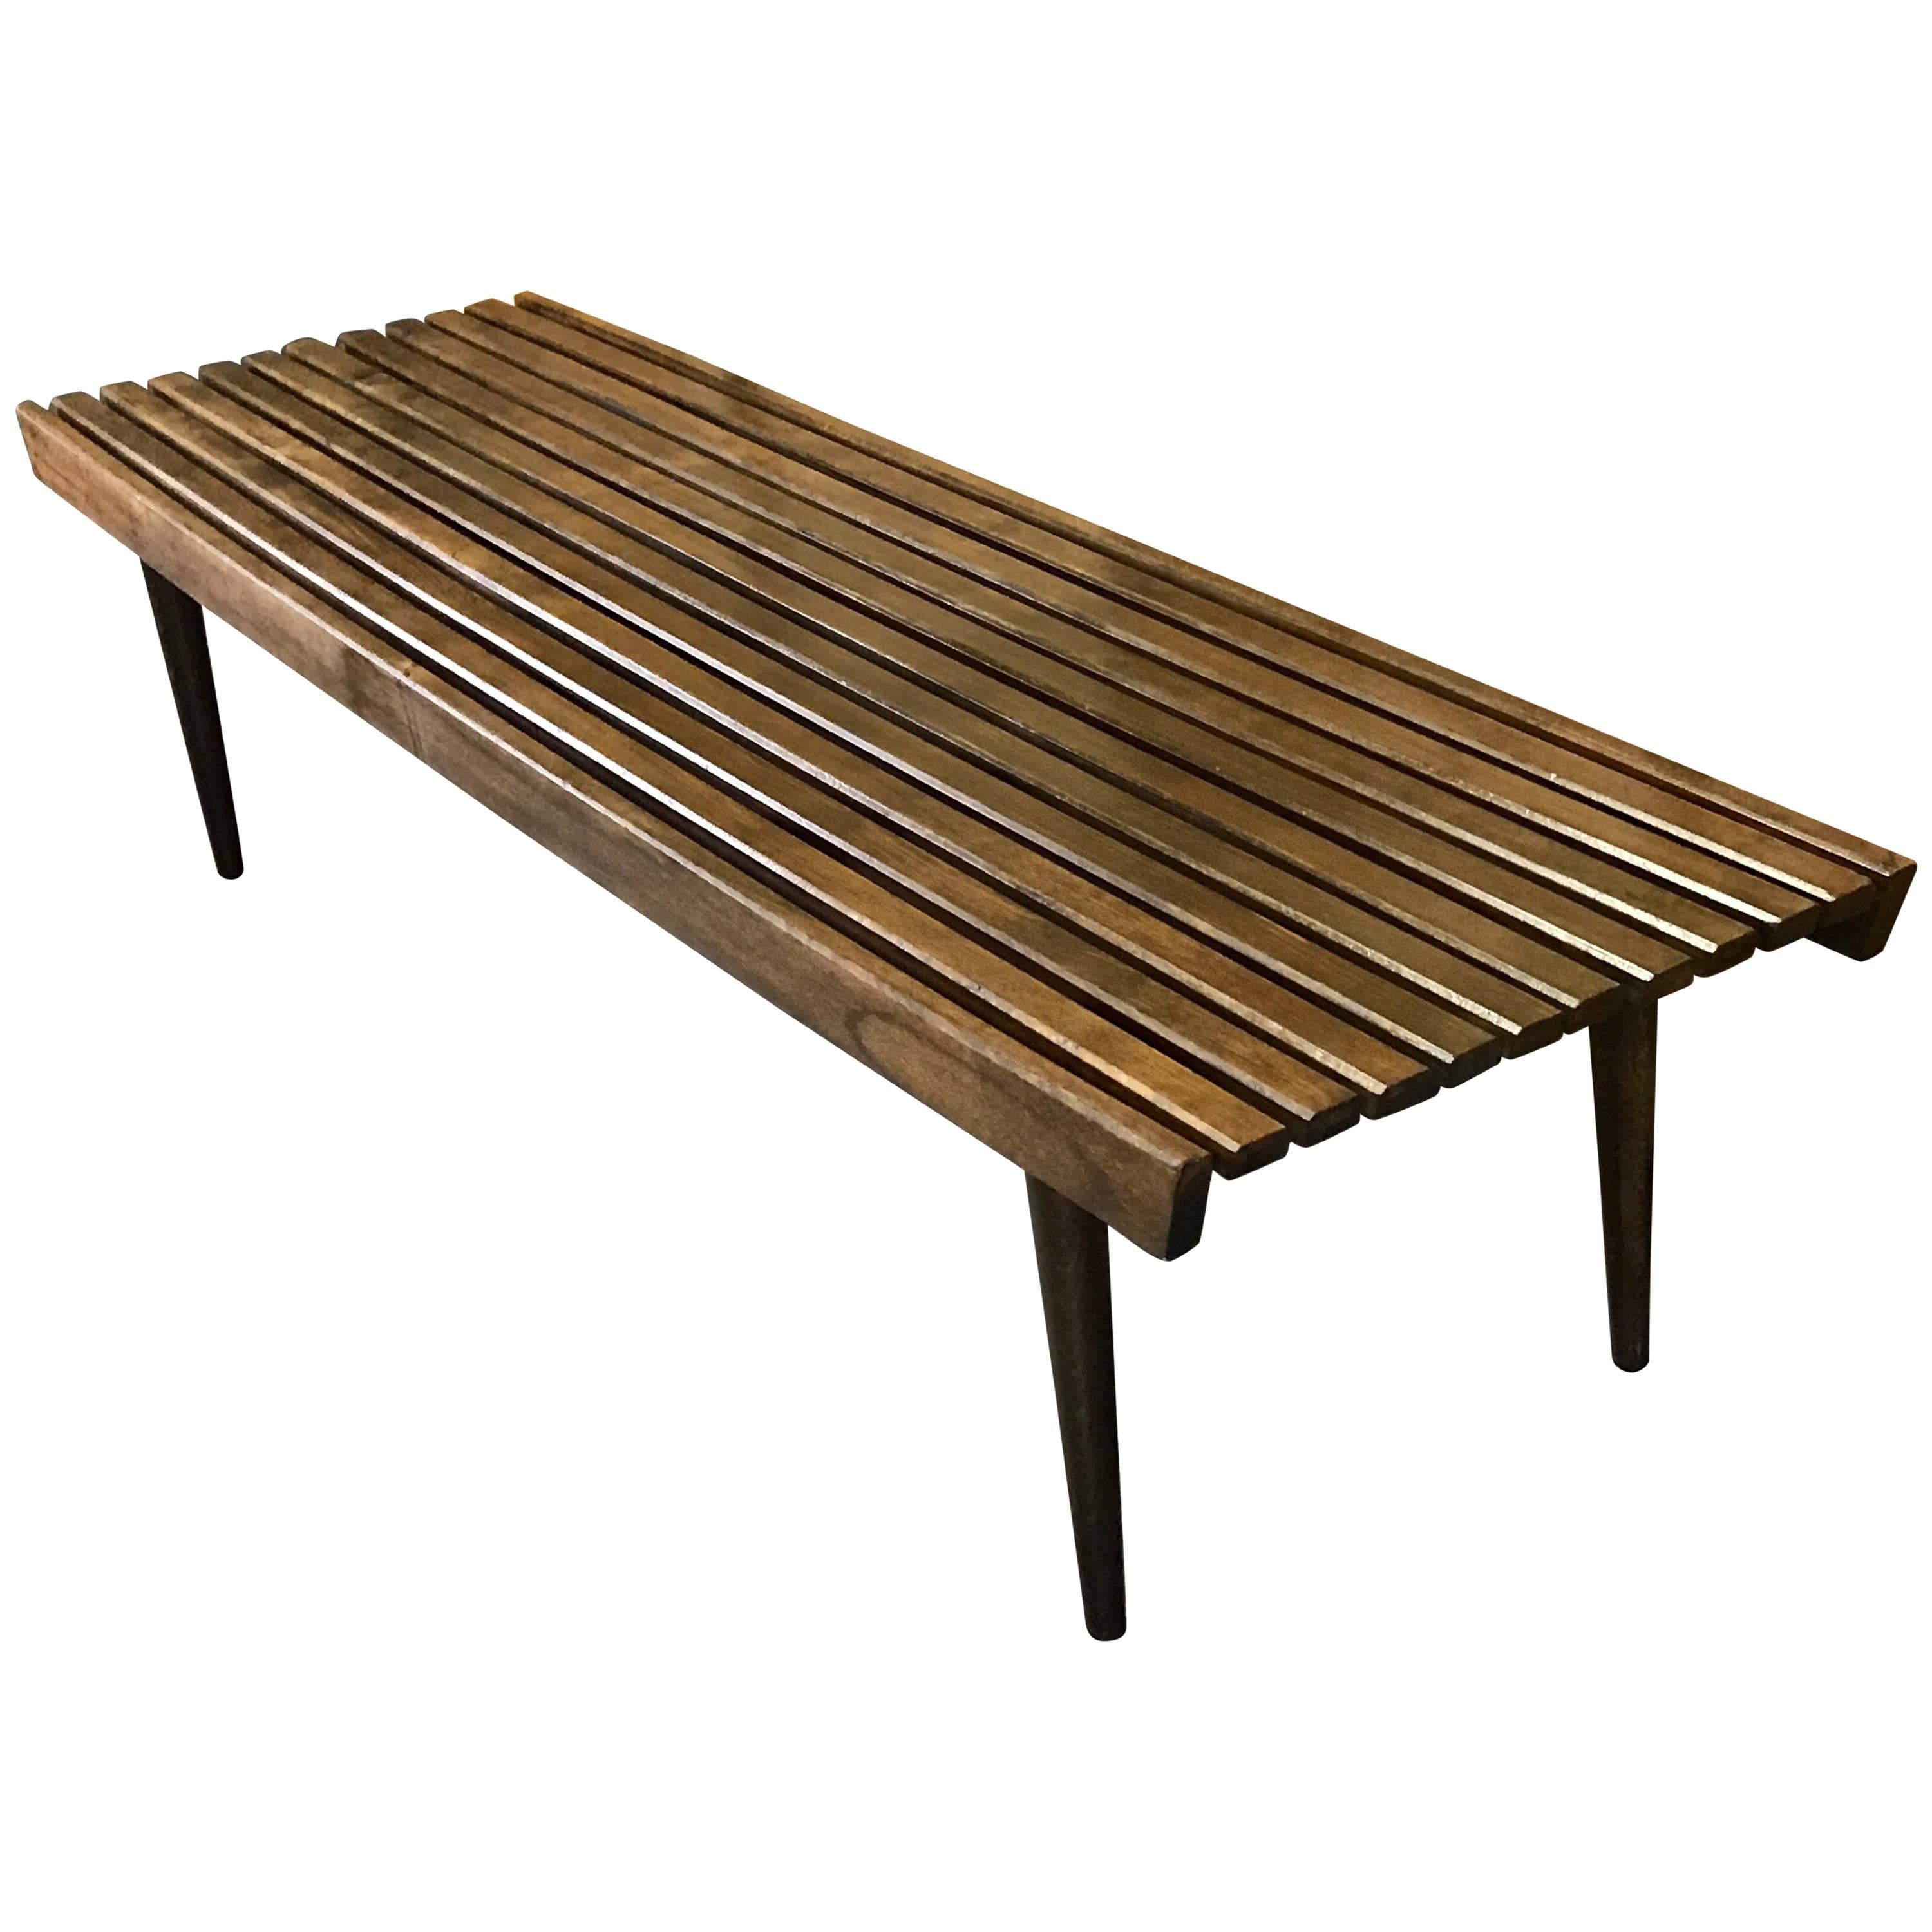 Midcentury Teak Slat Bench or Table in the Style of George Nelson